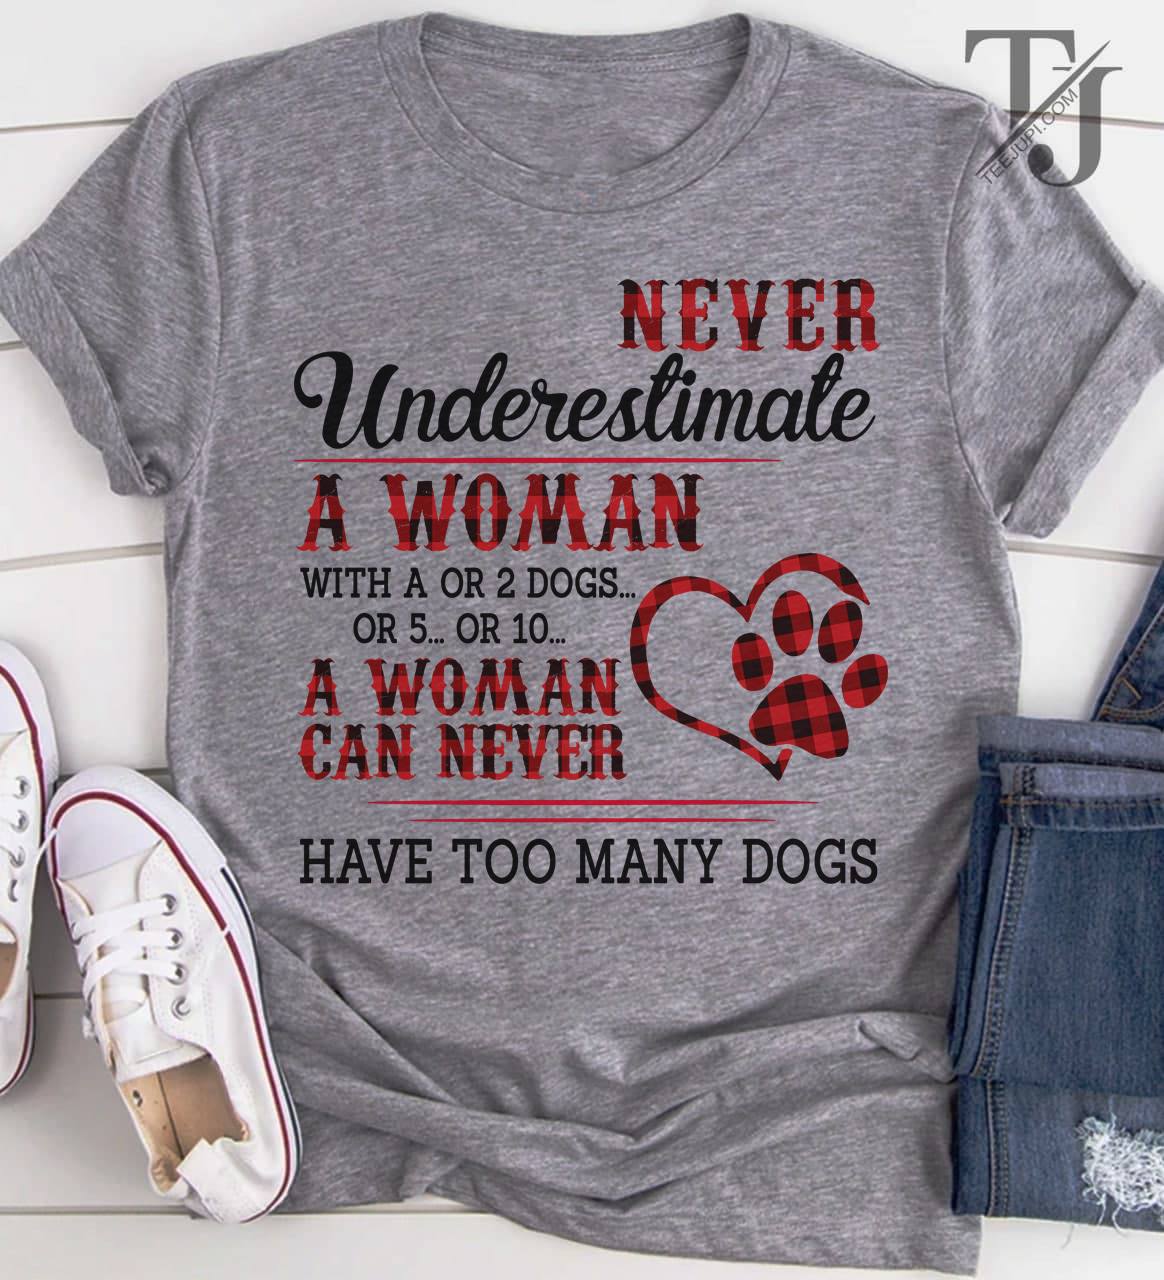 Never underestimate a woman can with dogs, a woman can never have too many dogs